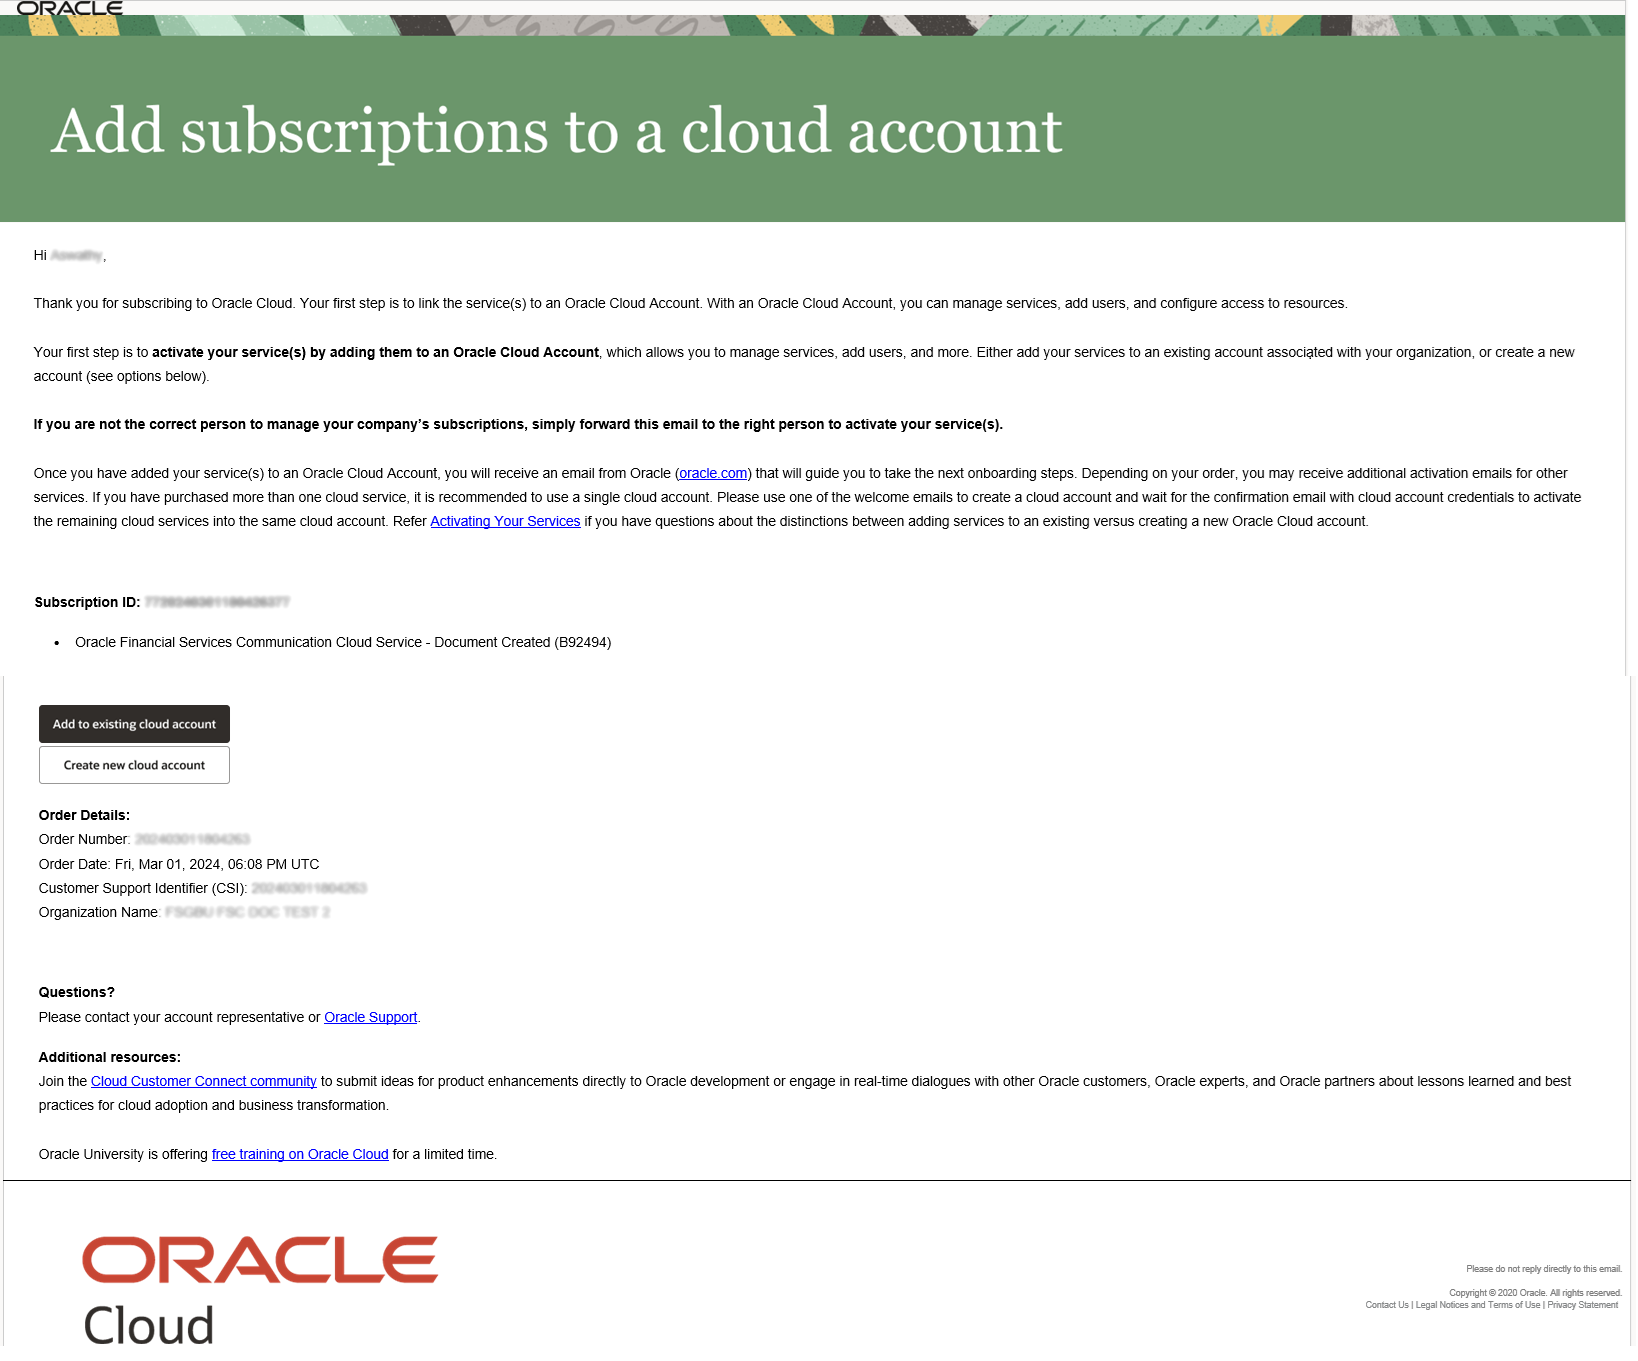 Welcome to New Oracle Cloud Service Subscription Email